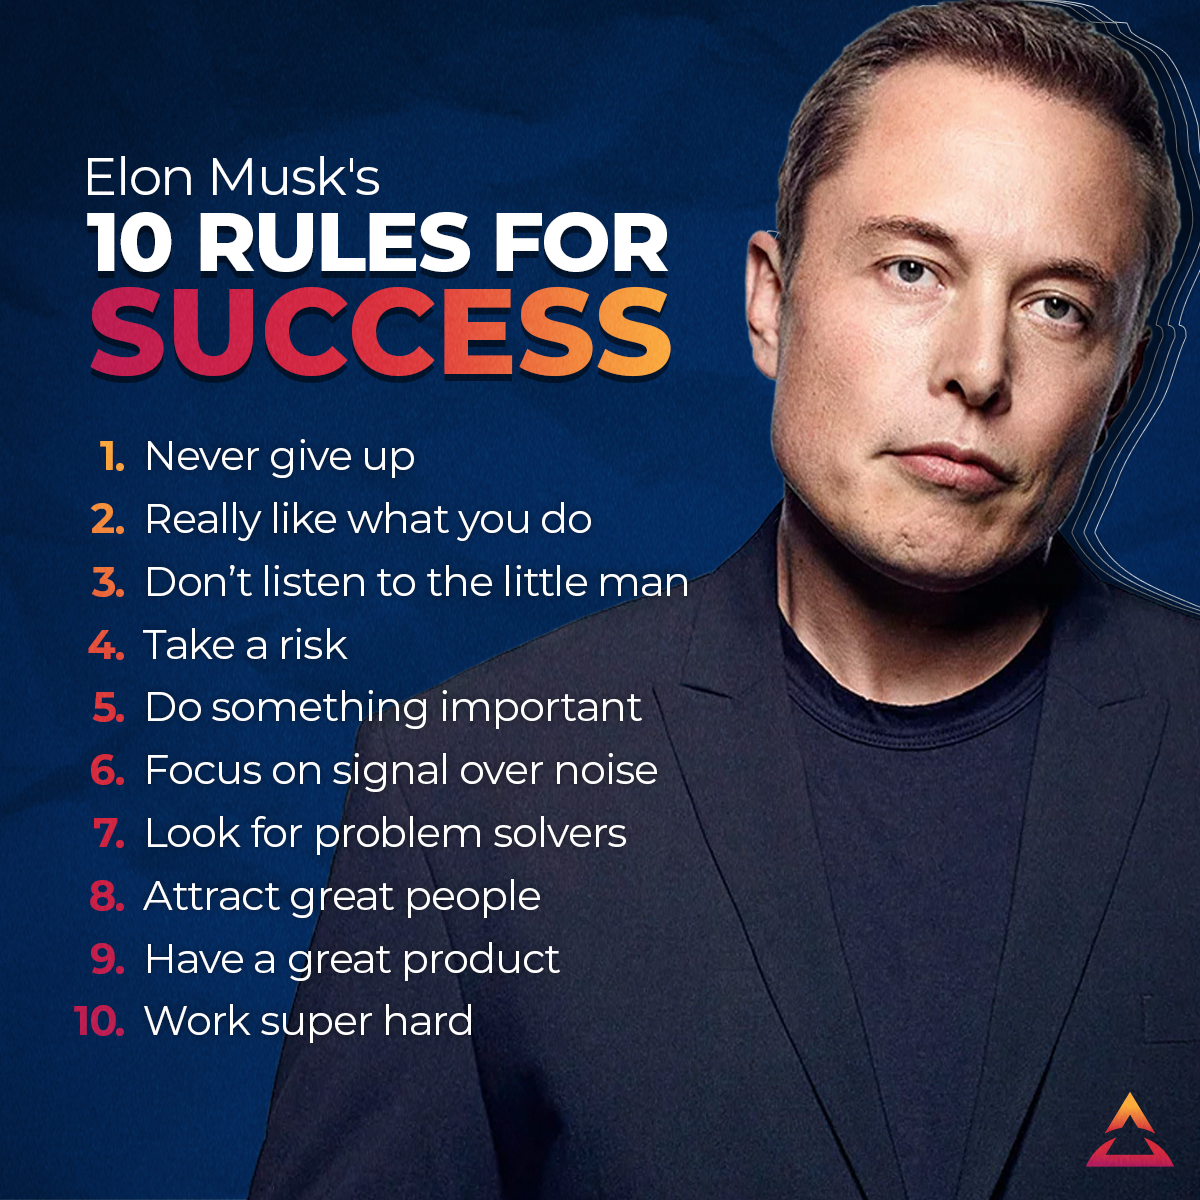 The making of Elon Musk: becoming the most influential person in history